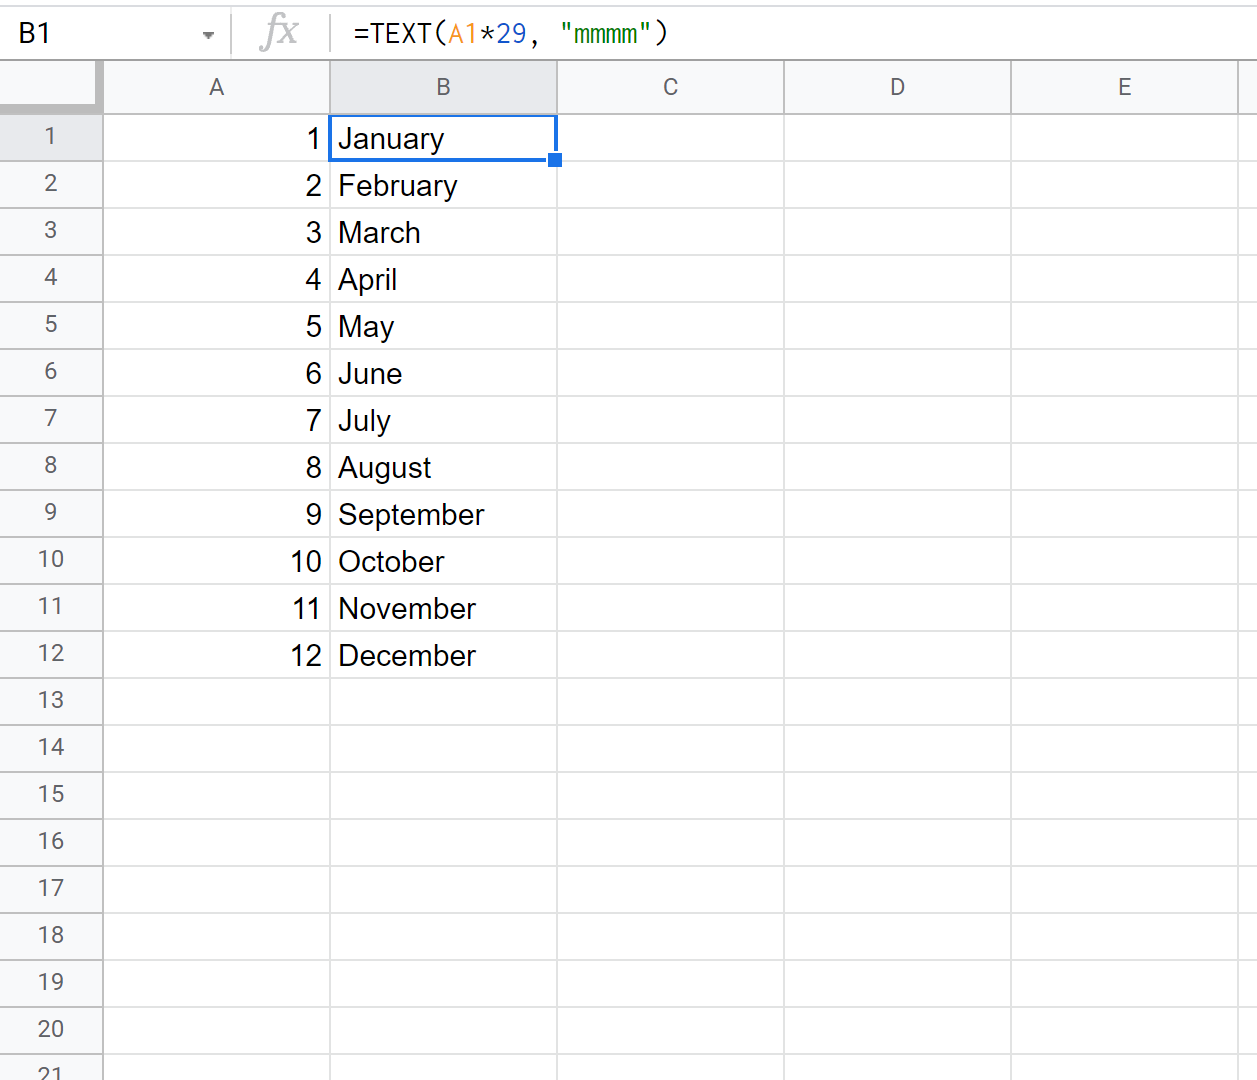 convert month number to month name in Google Sheets